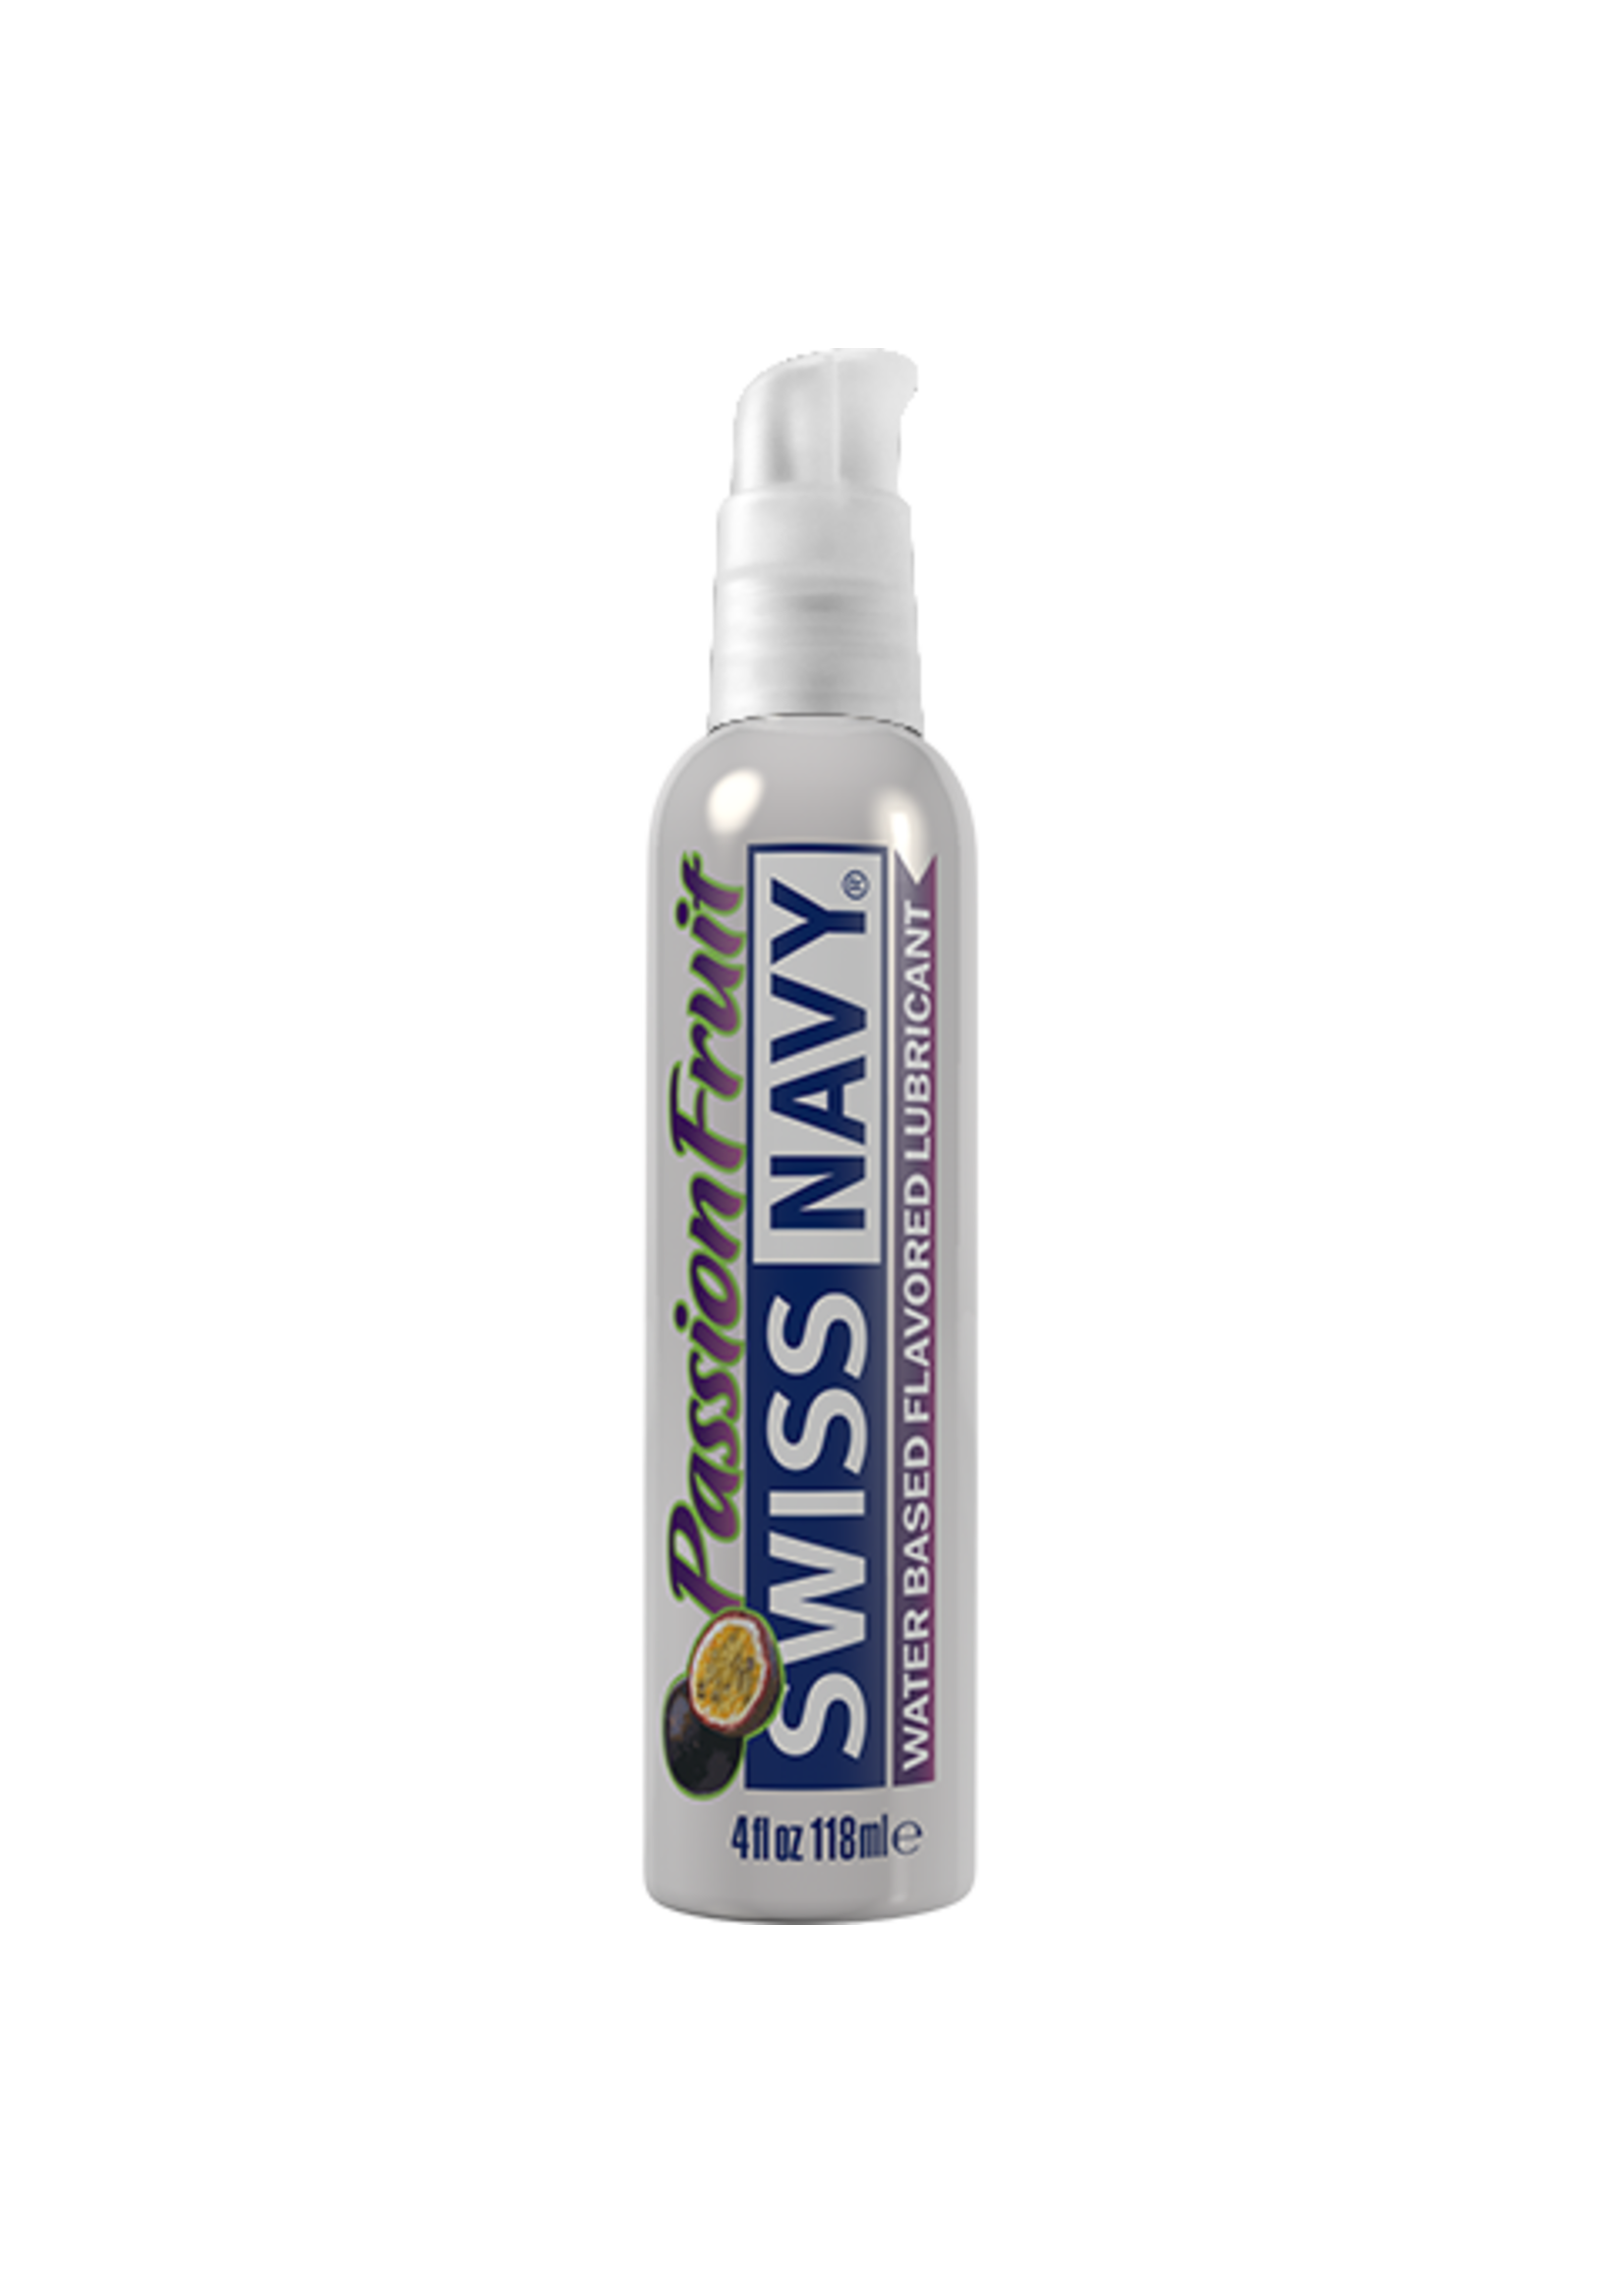 SWISS NAVY SWISS NAVY - WATER BASED LUBE - PASSION FRUIT 4OZ